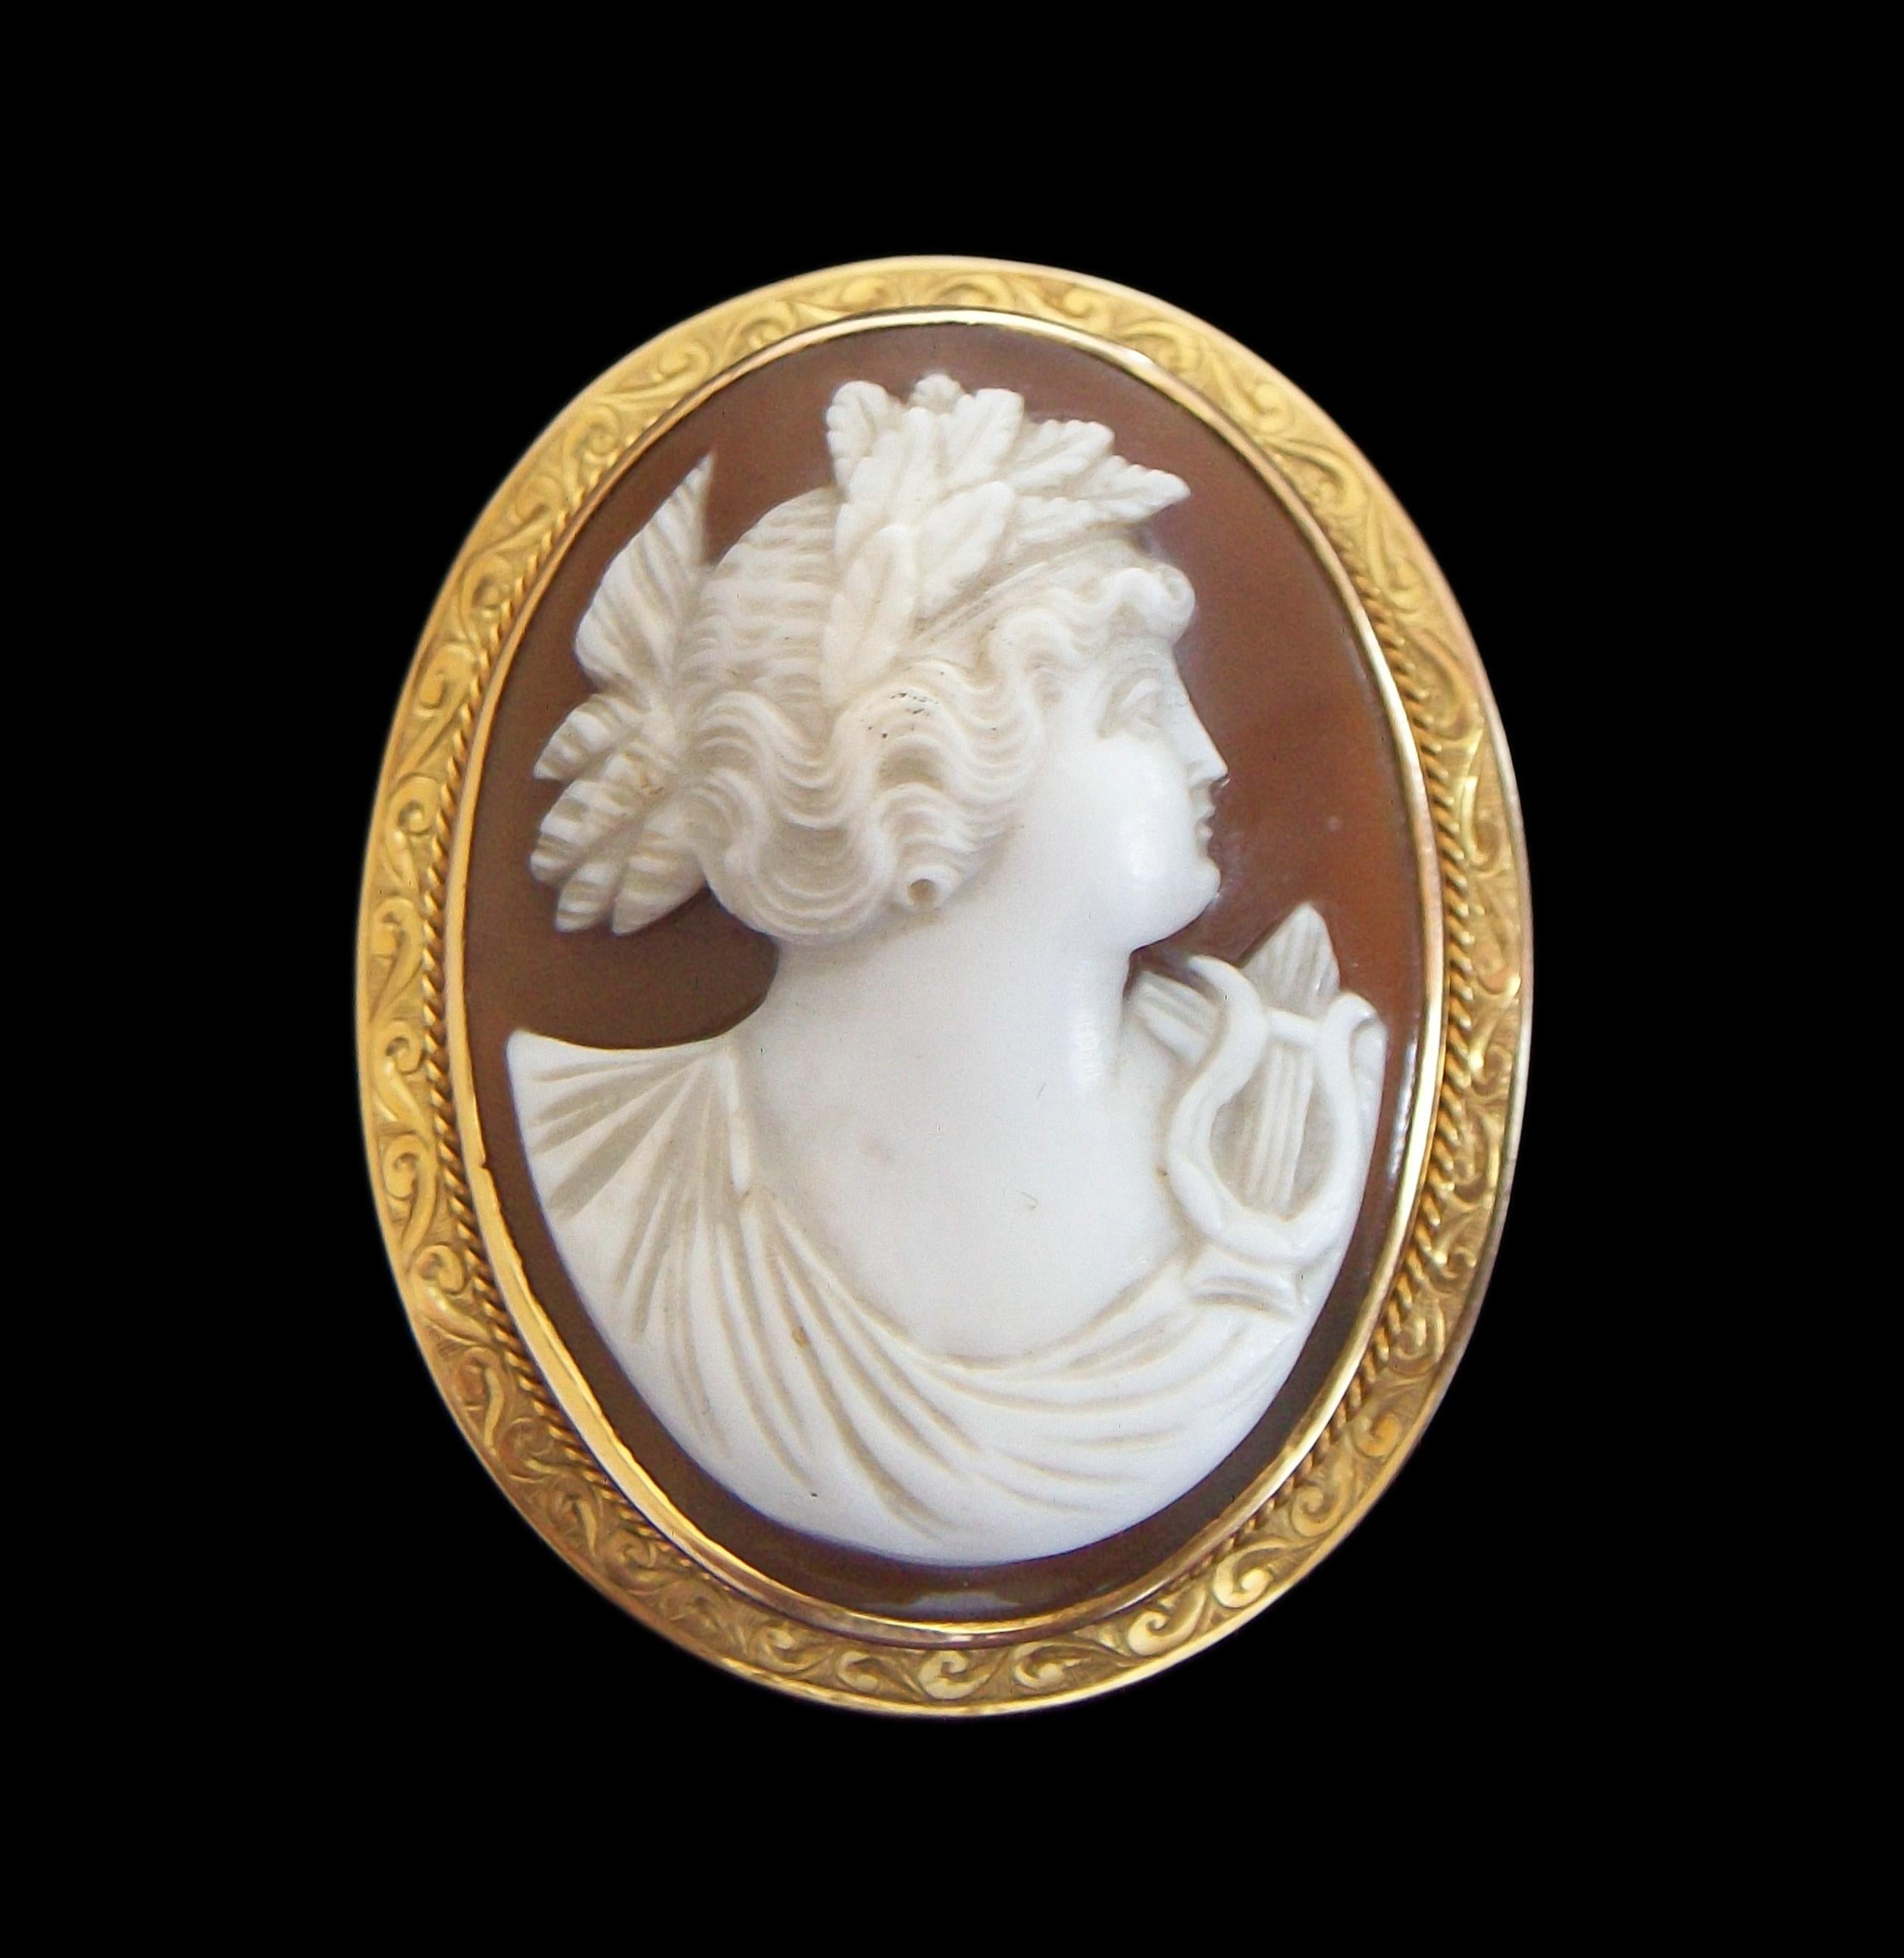 Extraordinary antique custom made goddess 'Erato' sardonyx shell cameo brooch or pendant with retractable bail (goddess 'Erato' was the muse of lyric and love poetry) - the cameo carved in deep relief and high contrast exposing the rust/brown